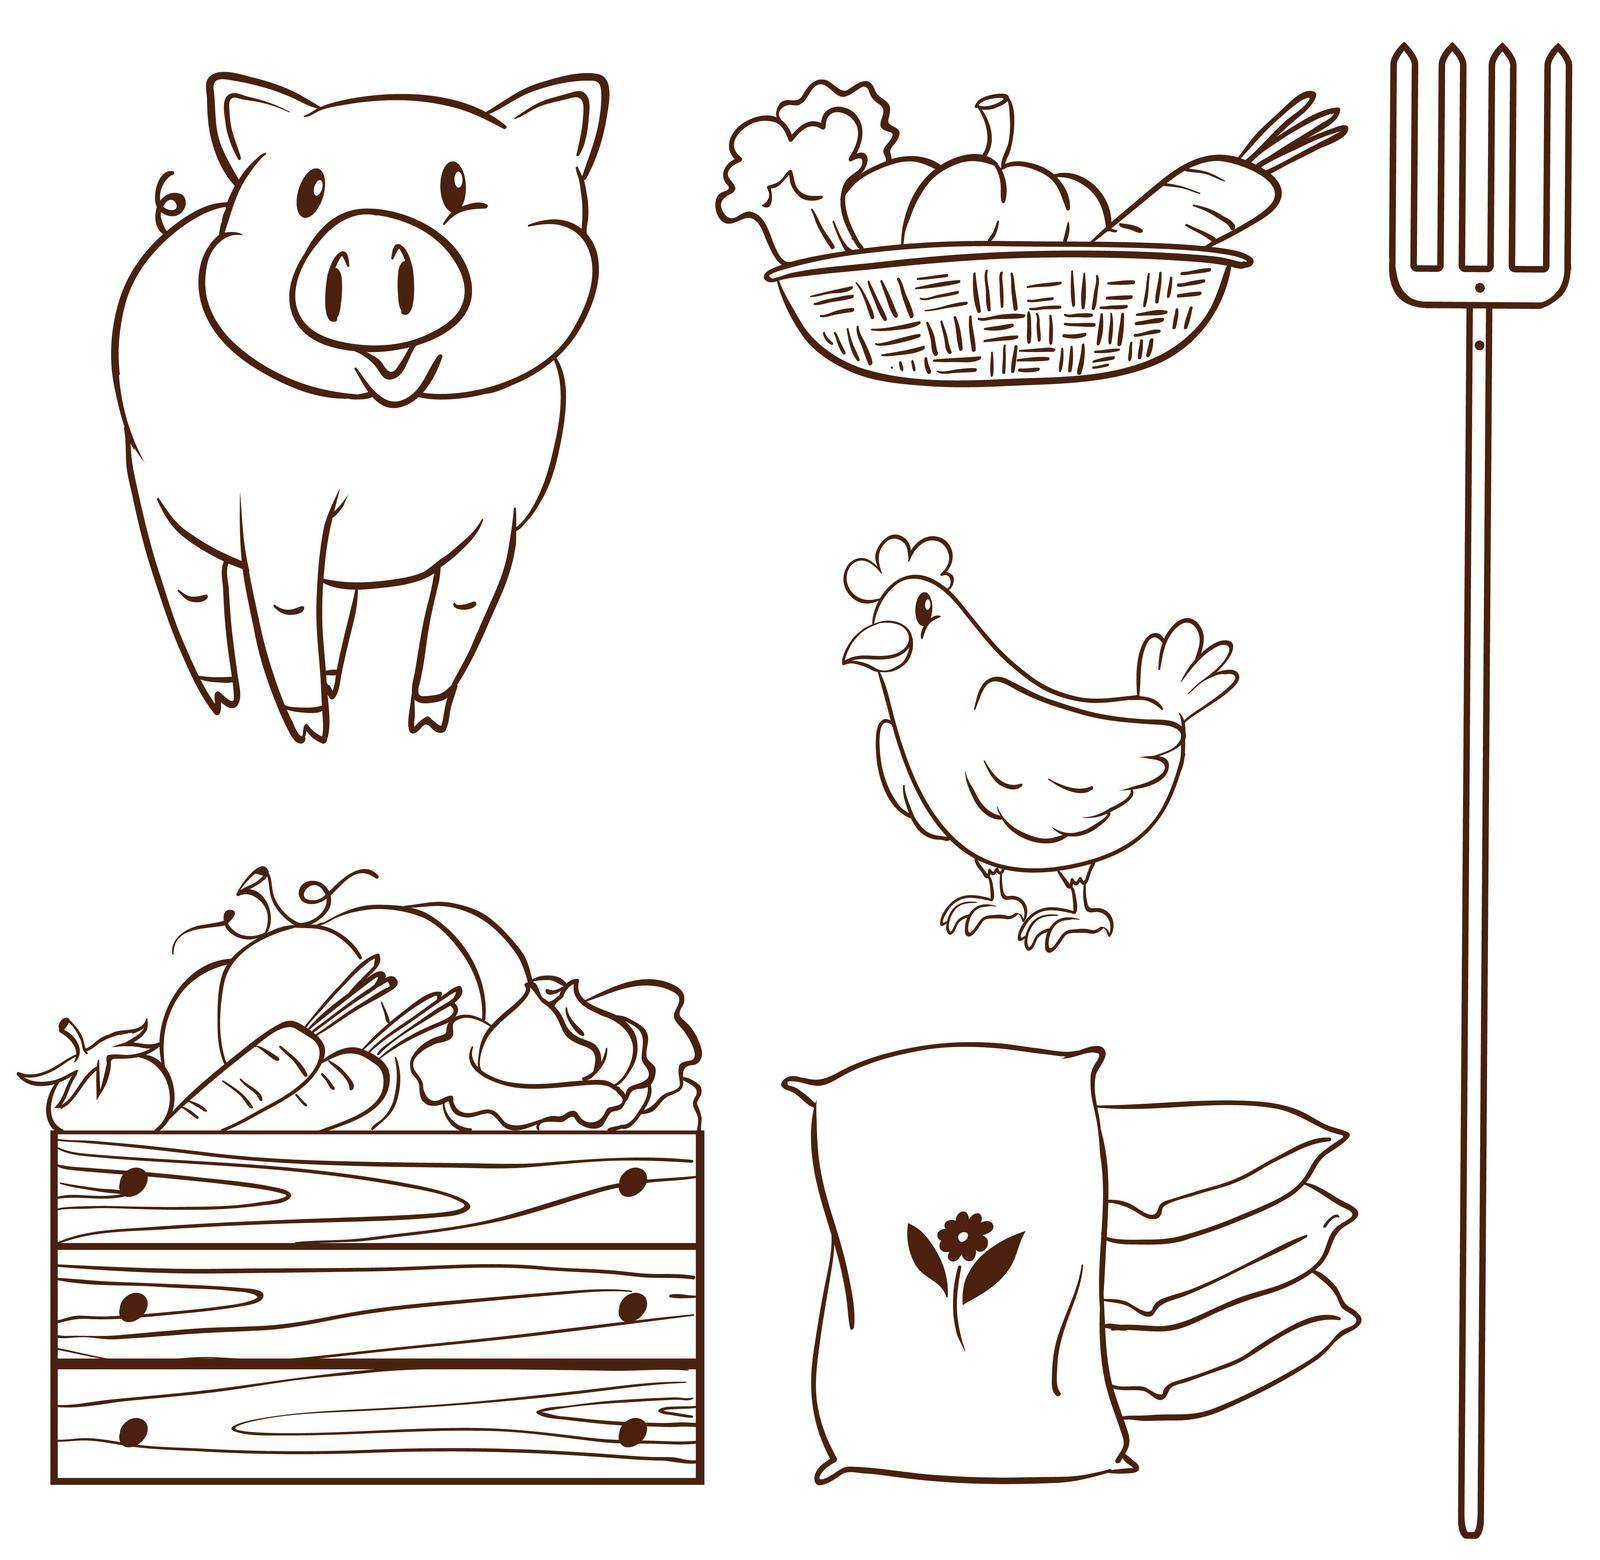 Illustration of a simple sketch of the farm animals and the harvested vegetables on a white background